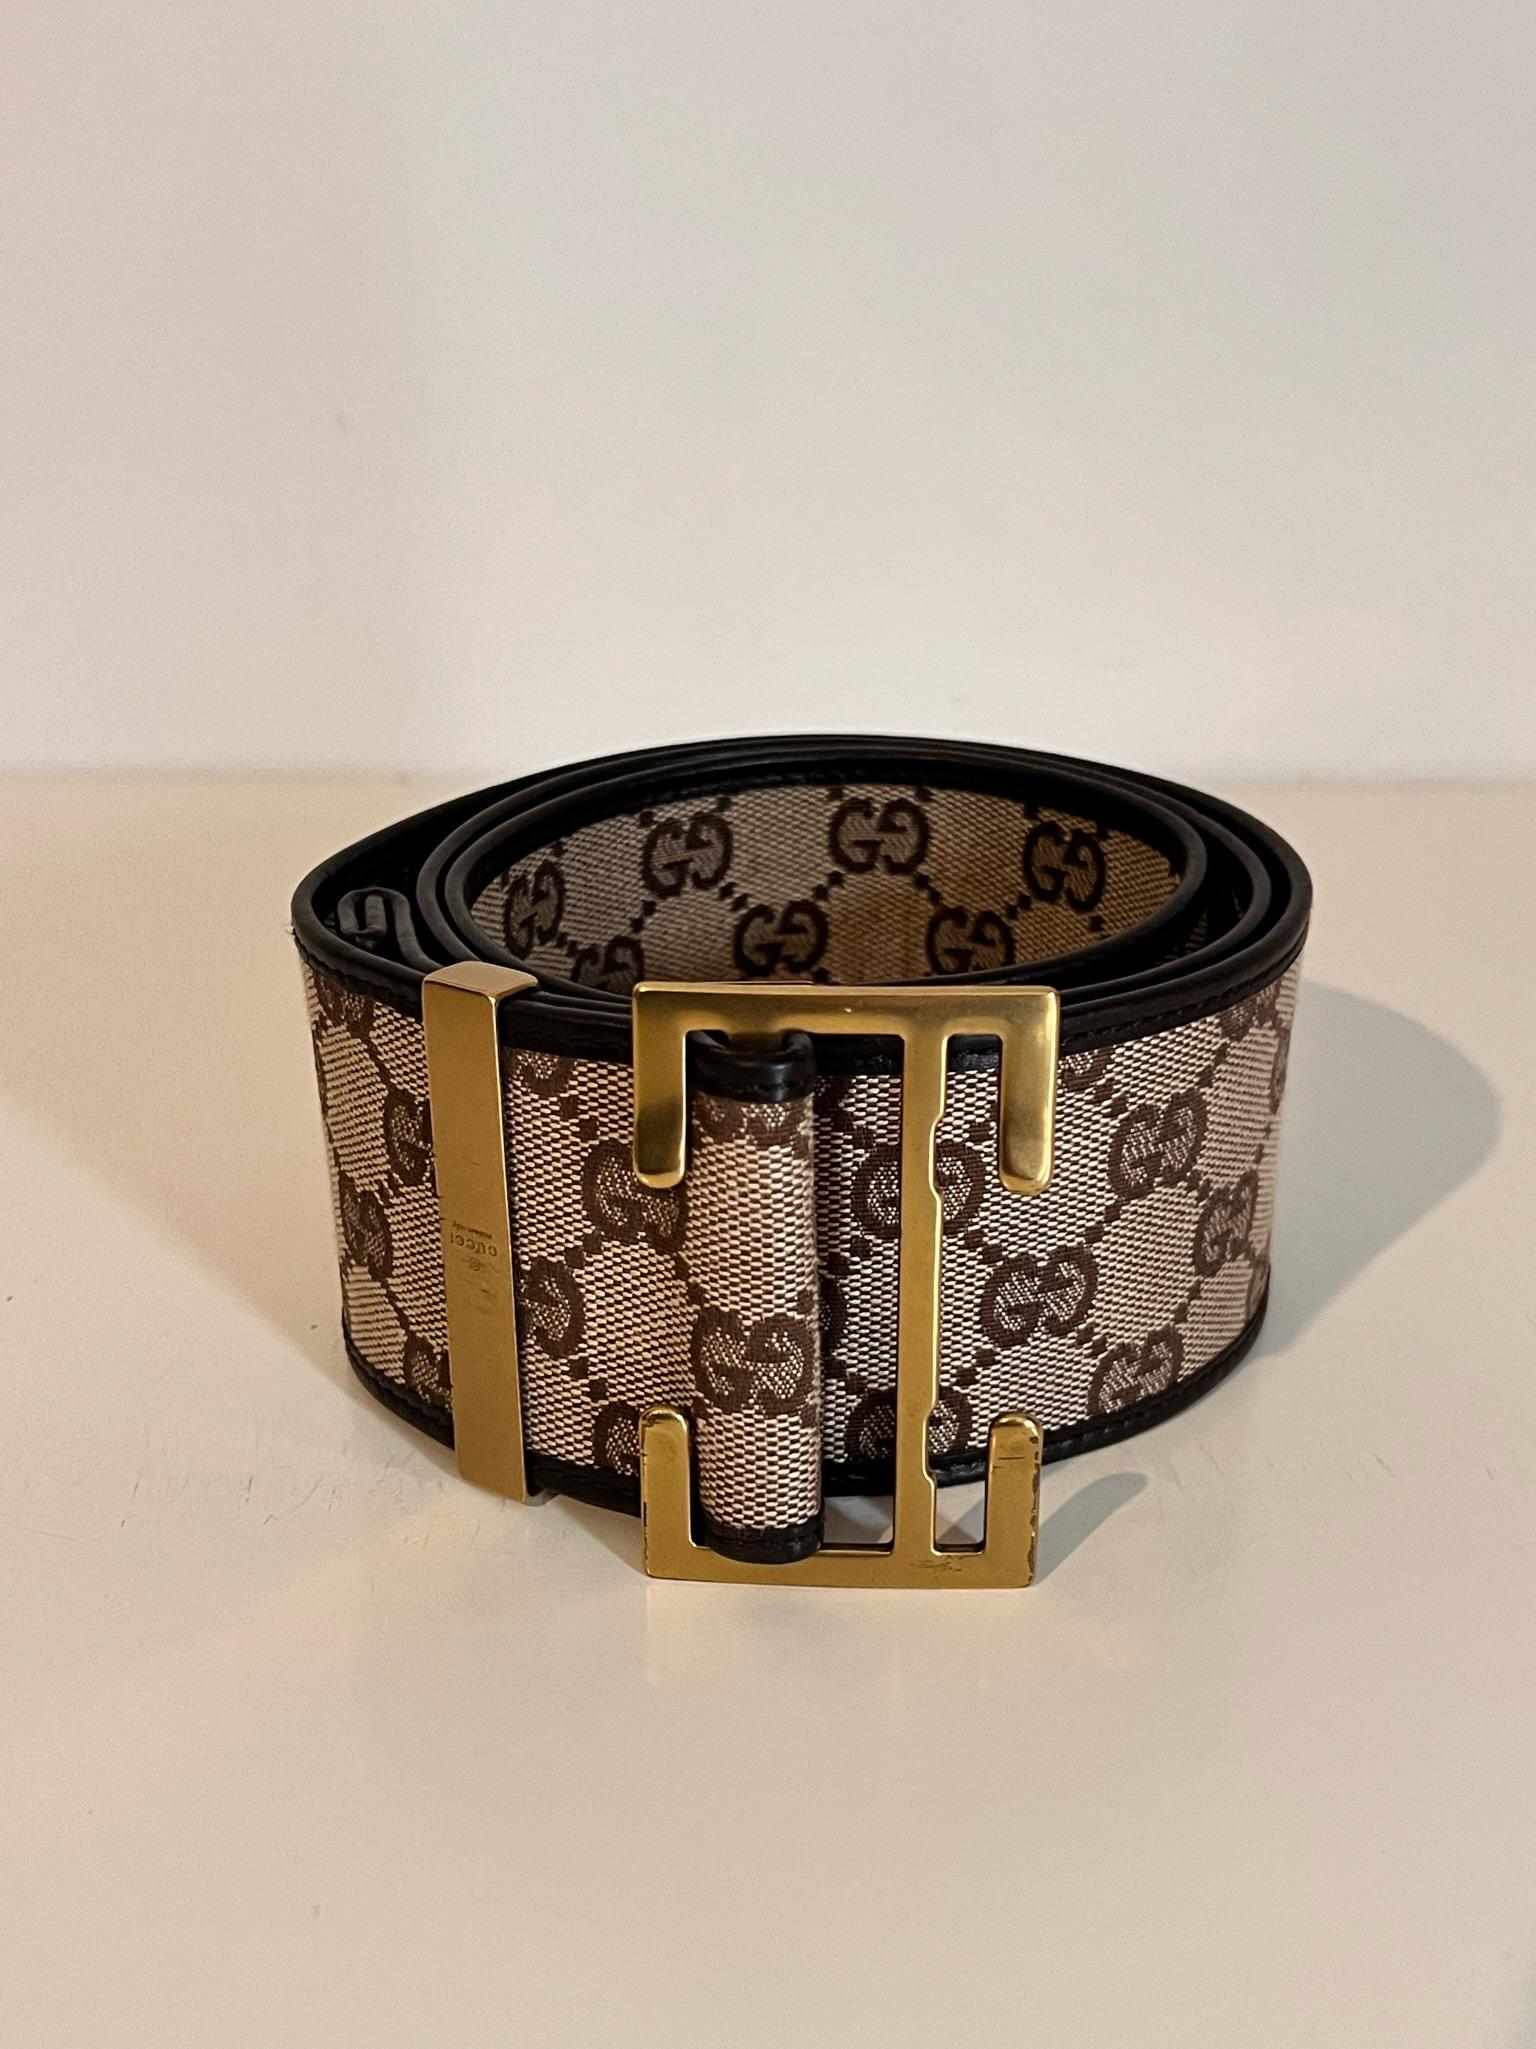 A 1990’s GUCCI  monogram GG canvas and leather belt with unique gold cut out buckle. some signs of wear consistent with age and use. 


A super special piece

Made in Italy